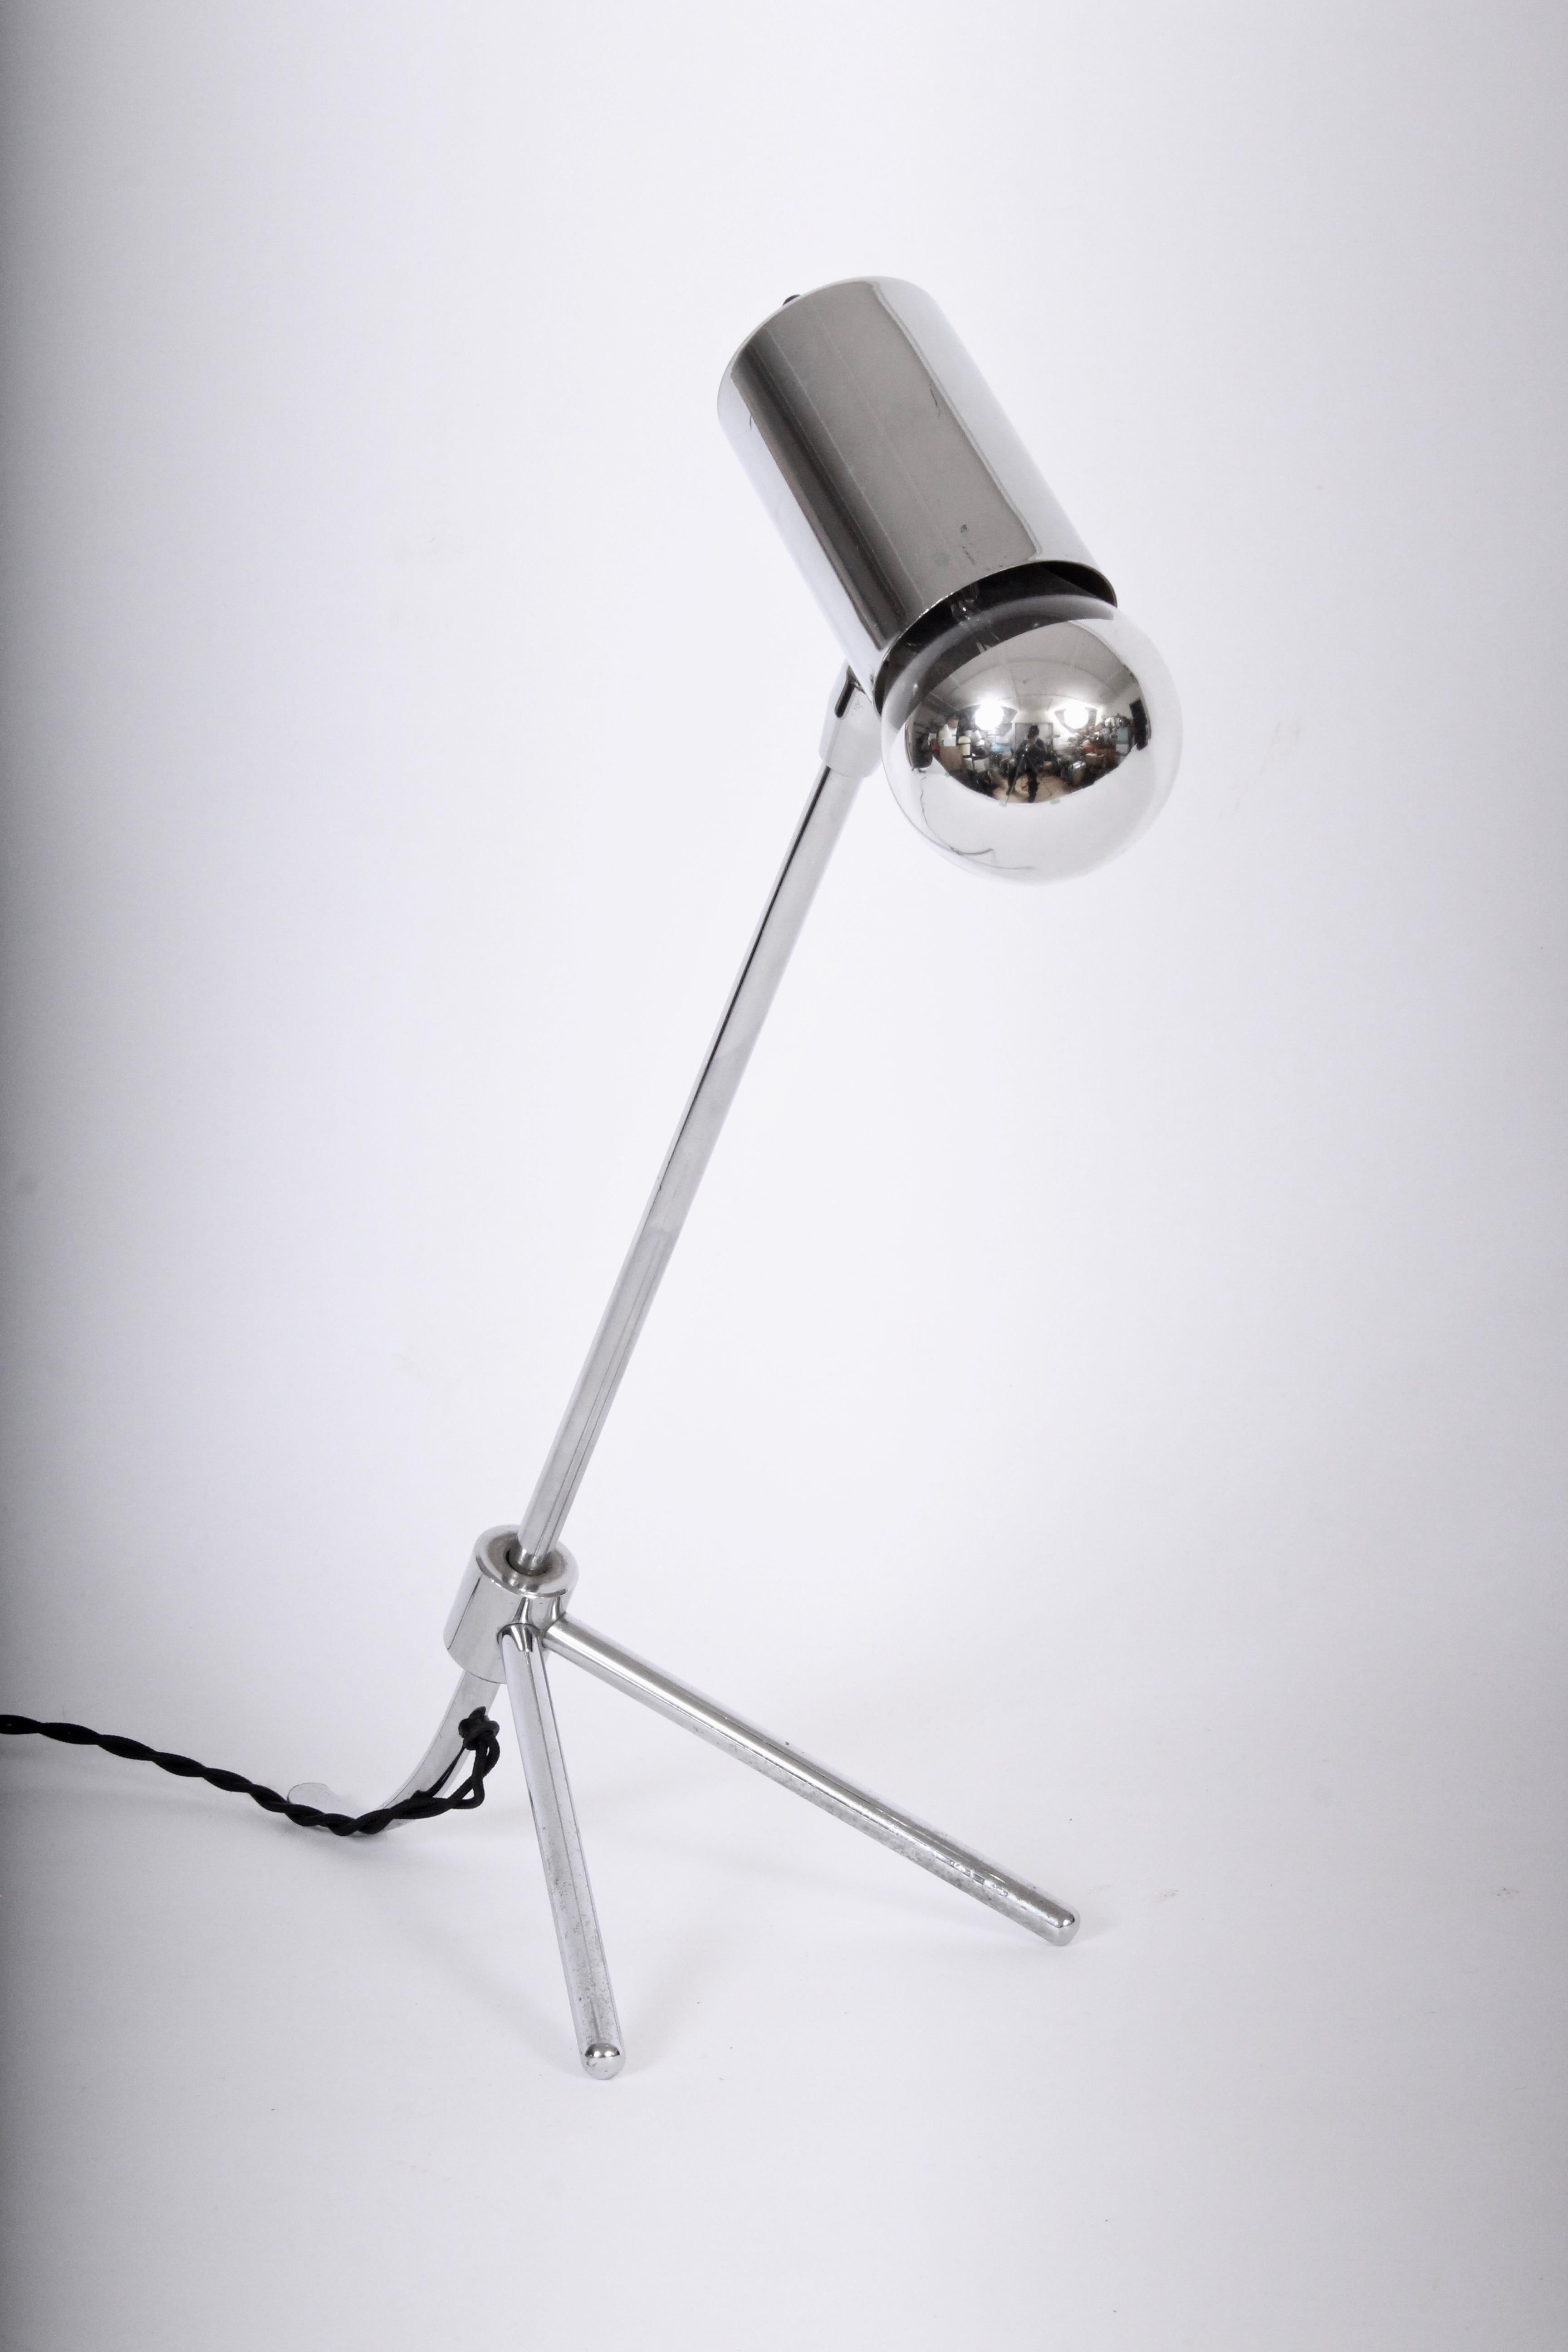 Modernist nickel-plate tripod petite table lamp, in the manner of Jean Boris Lacroix, 1960's. Adjustable positions, standard size socket, featuring a round Mercury glass bulb. Premium quality. Finely crafted. Minimalist design.